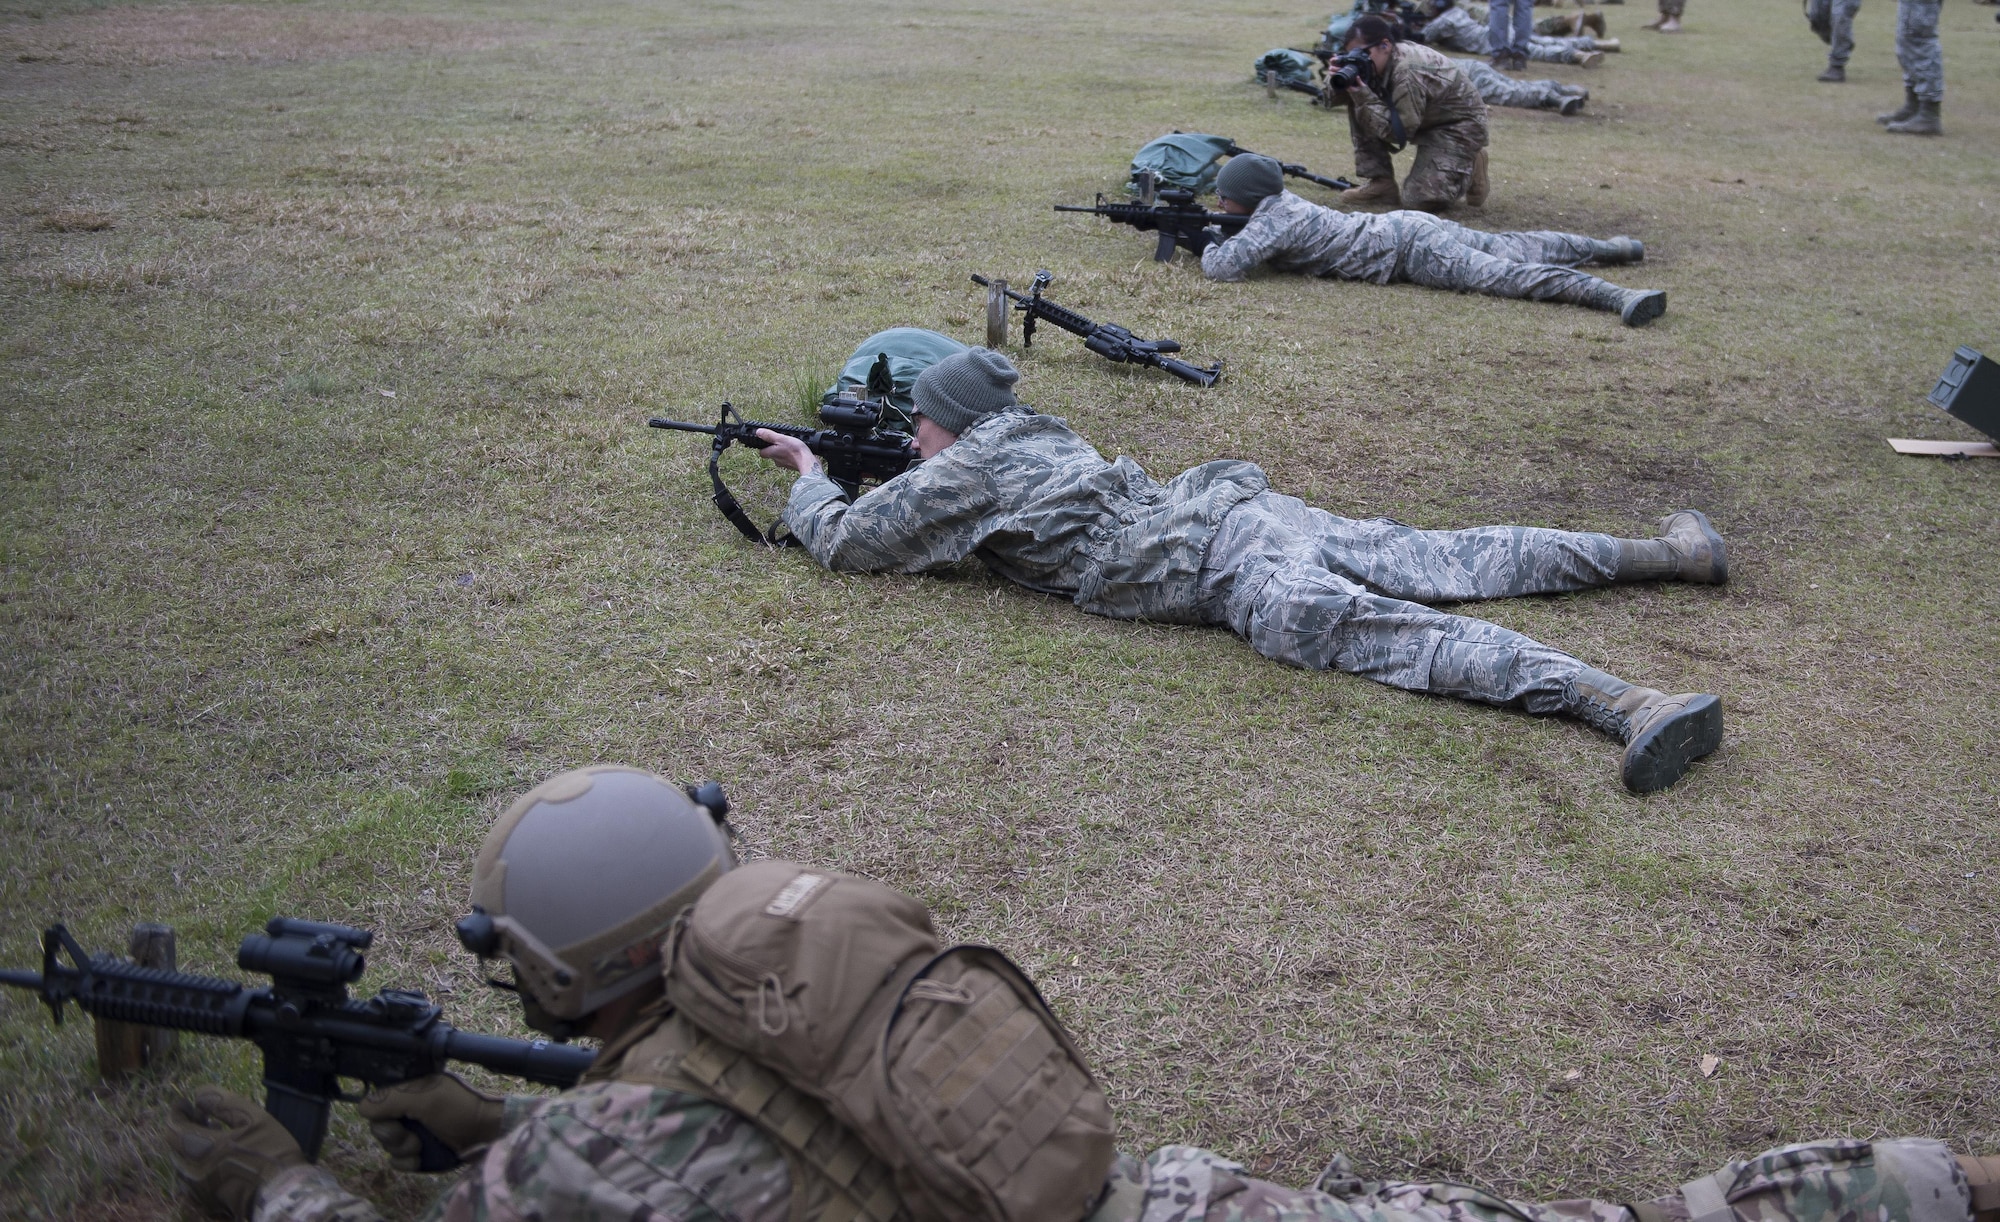 Combat camera Airmen zero-in their M4 rifles March 3, 2016, during exercise Scorpion Lens 2016, at McCrady Training Center on Fort Jackson, S.C. The exercise is an annual training requirement incorporating combat camera job qualification standards and advanced weapons and tactical training with Army instructors. (U.S. Air Force photo/Staff Sgt. Jared Trimarchi)